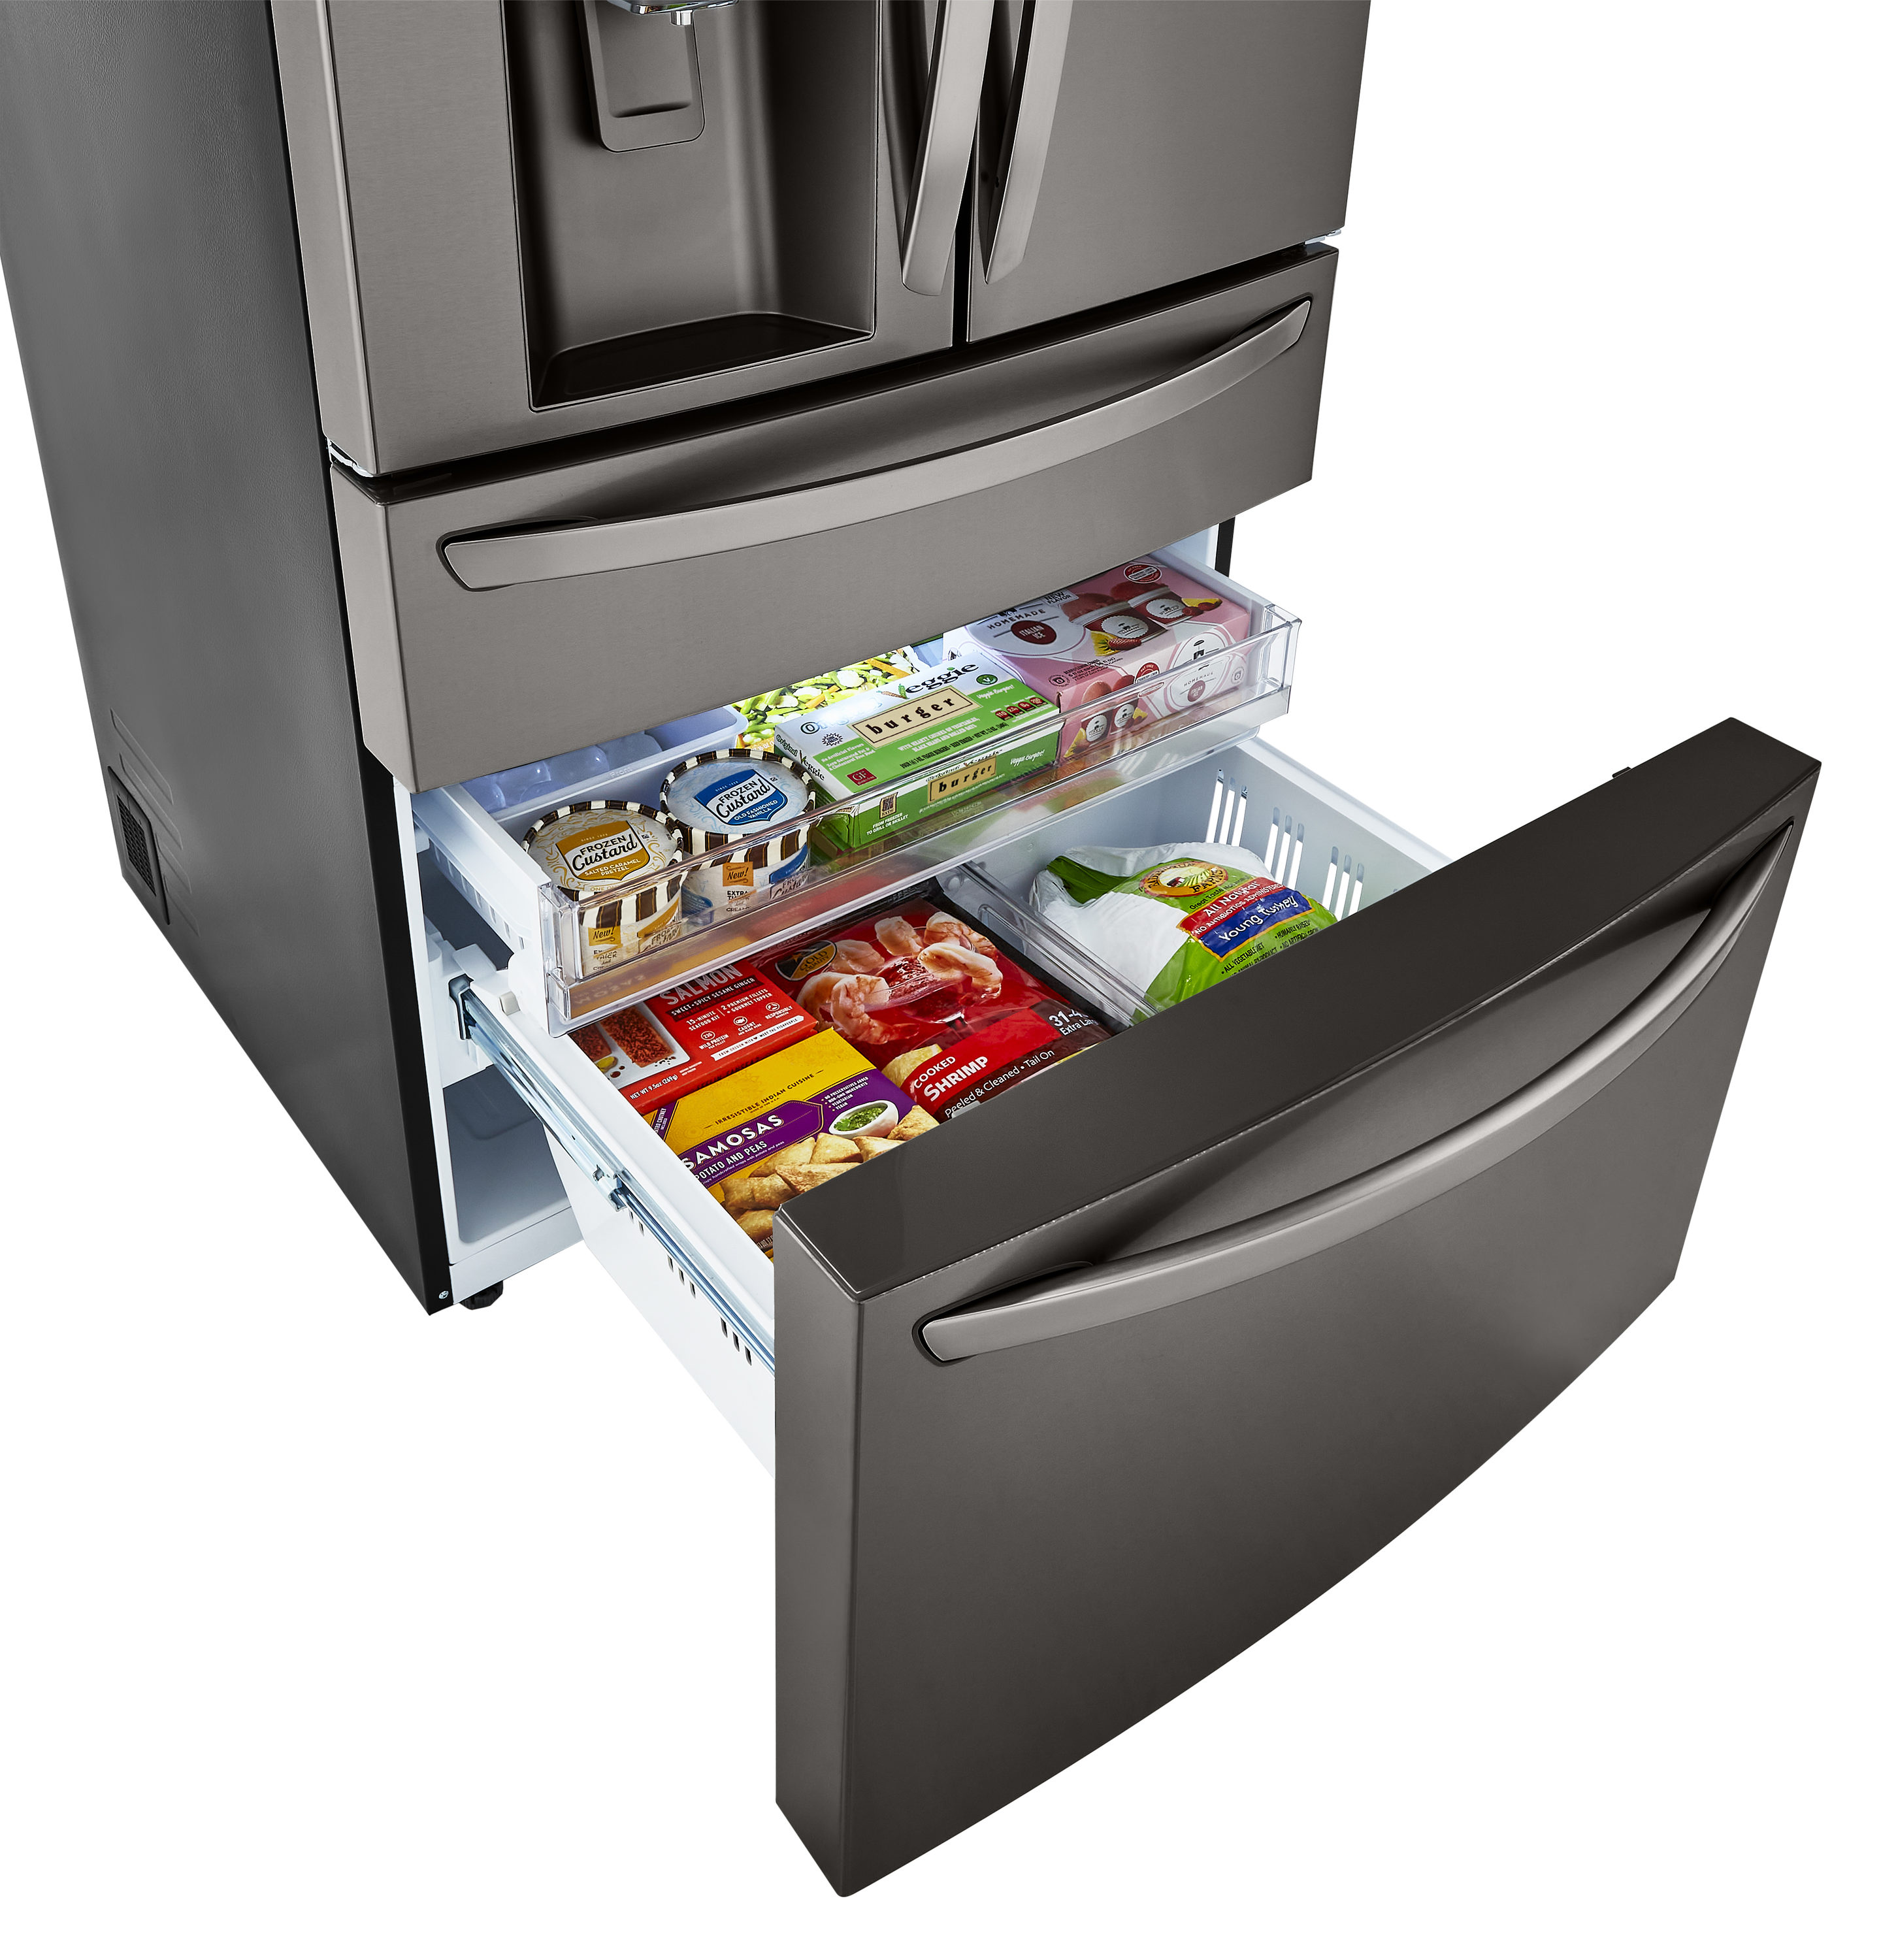 LG LRMDS3006D: Black Stainless Steel 30 Cu. ft. Smart Refrigerator with Craft Ice